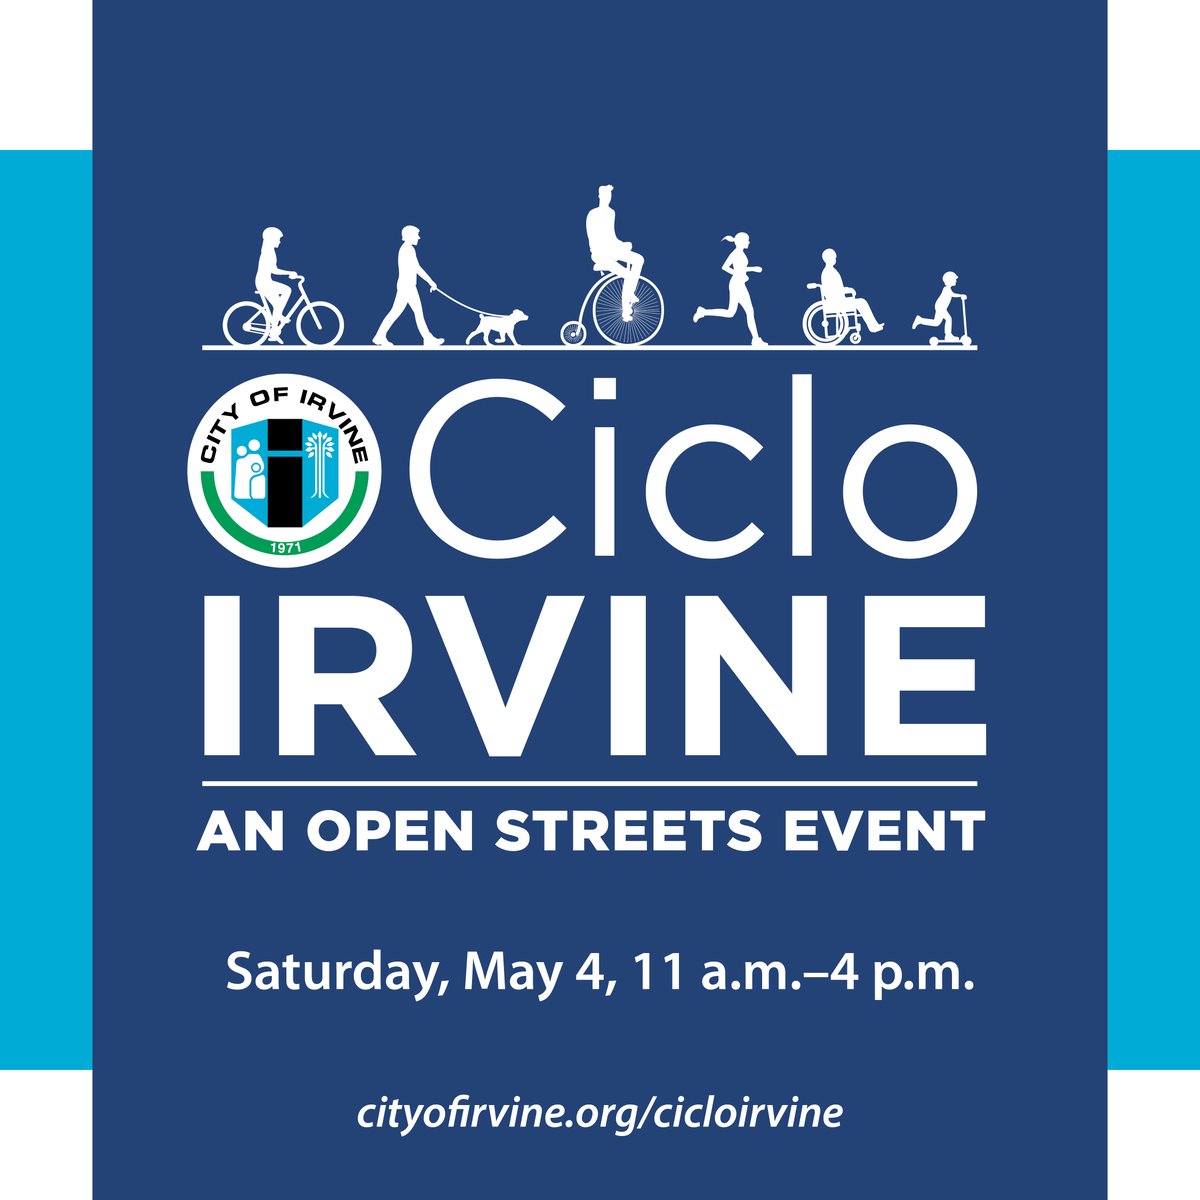 Experience Irvine in a vibrant, new, car-free way! Join us at our first-ever Open Streets Event. CicloIrvine is Saturday, May 4, 11 a.m.–4 p.m., along Barranca Parkway and Harvard Avenue.  
 
ℹ️ cityofirvine.org/cicloirvine 

#CicloIrvine #OpenStreets